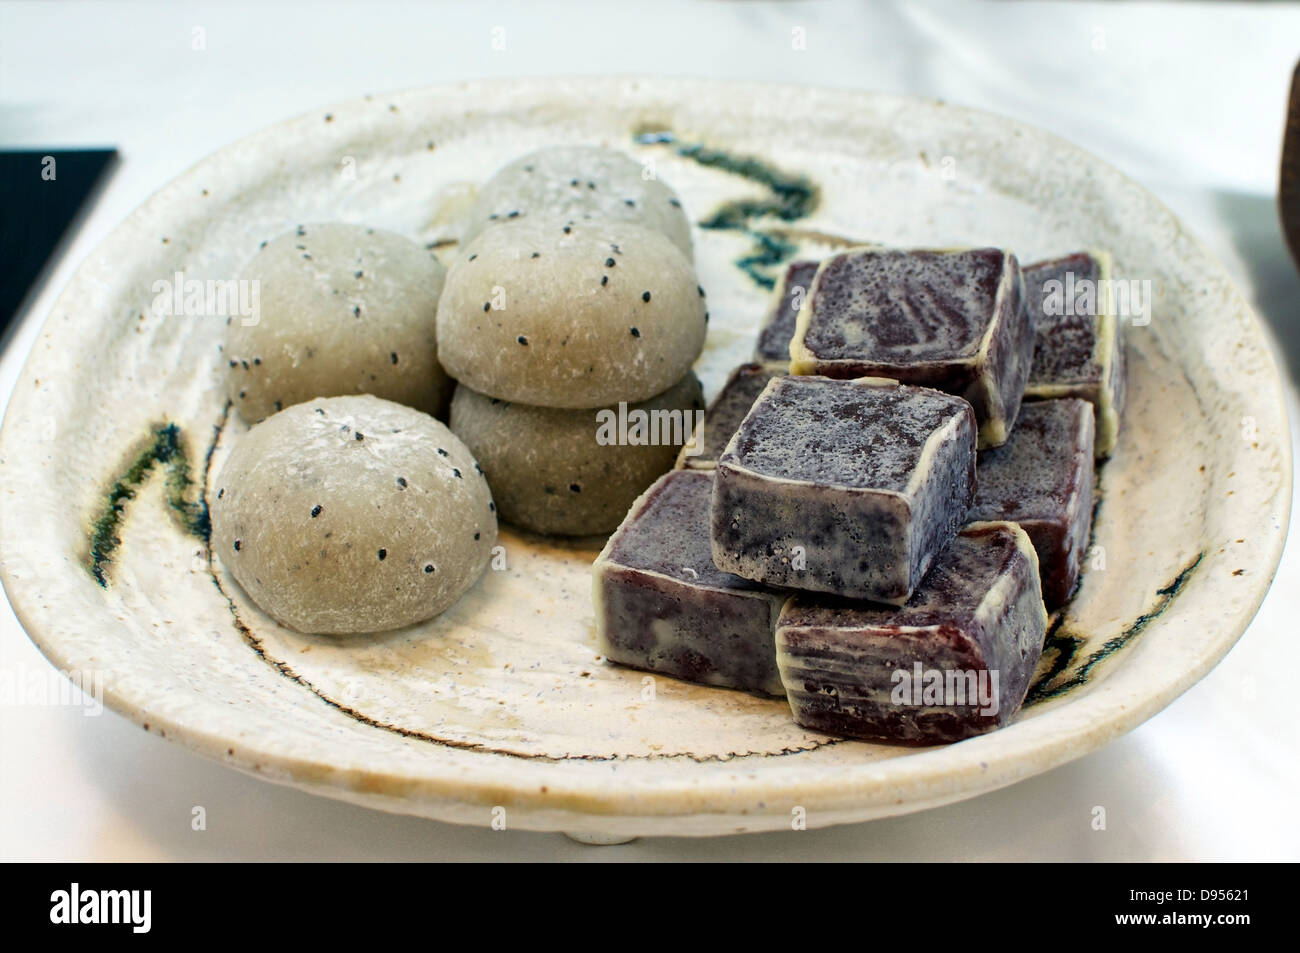 Japanese Sweets made of Mochi (glutinous rice) Stock Photo